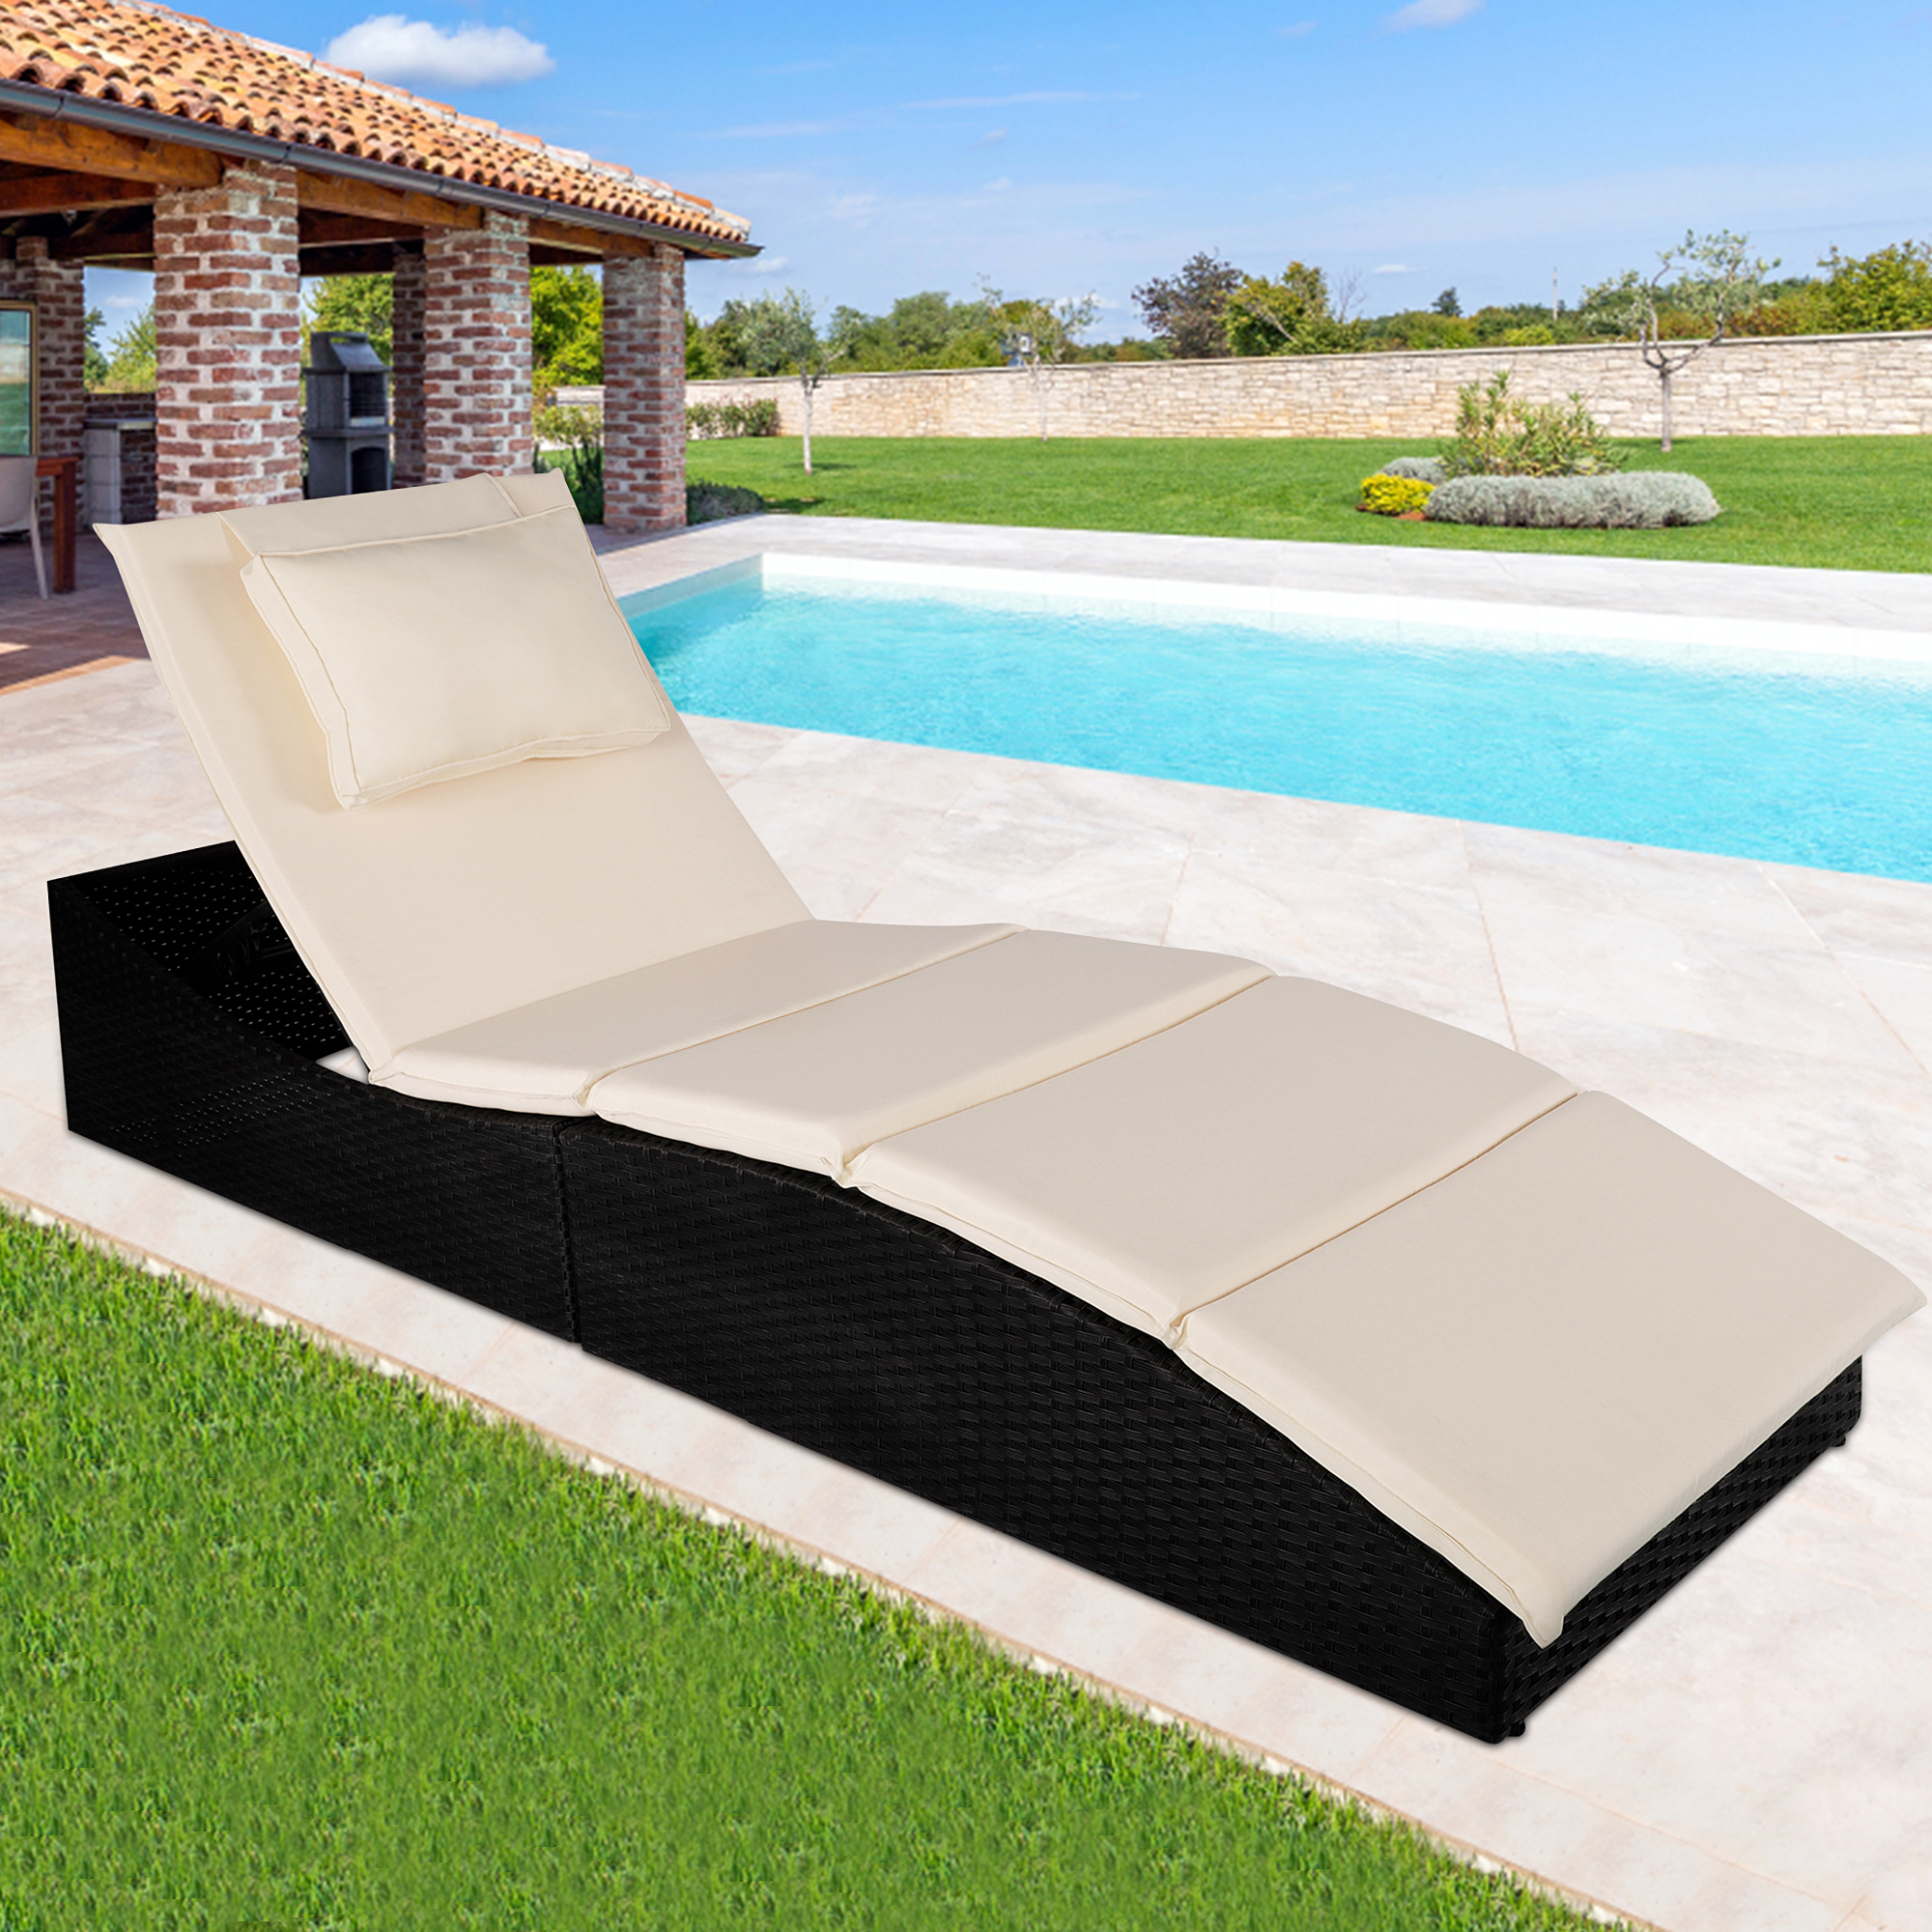 ENYOPRO Outdoor Chaise Lounge Chair, Adjustable Chaise Lounge Chair with Cushion, for Outdoor Patio Beach Pool Backyard, Folding PE Rattan Reclining Lounger Chair Furniture Chaise, K2685 - image 4 of 9